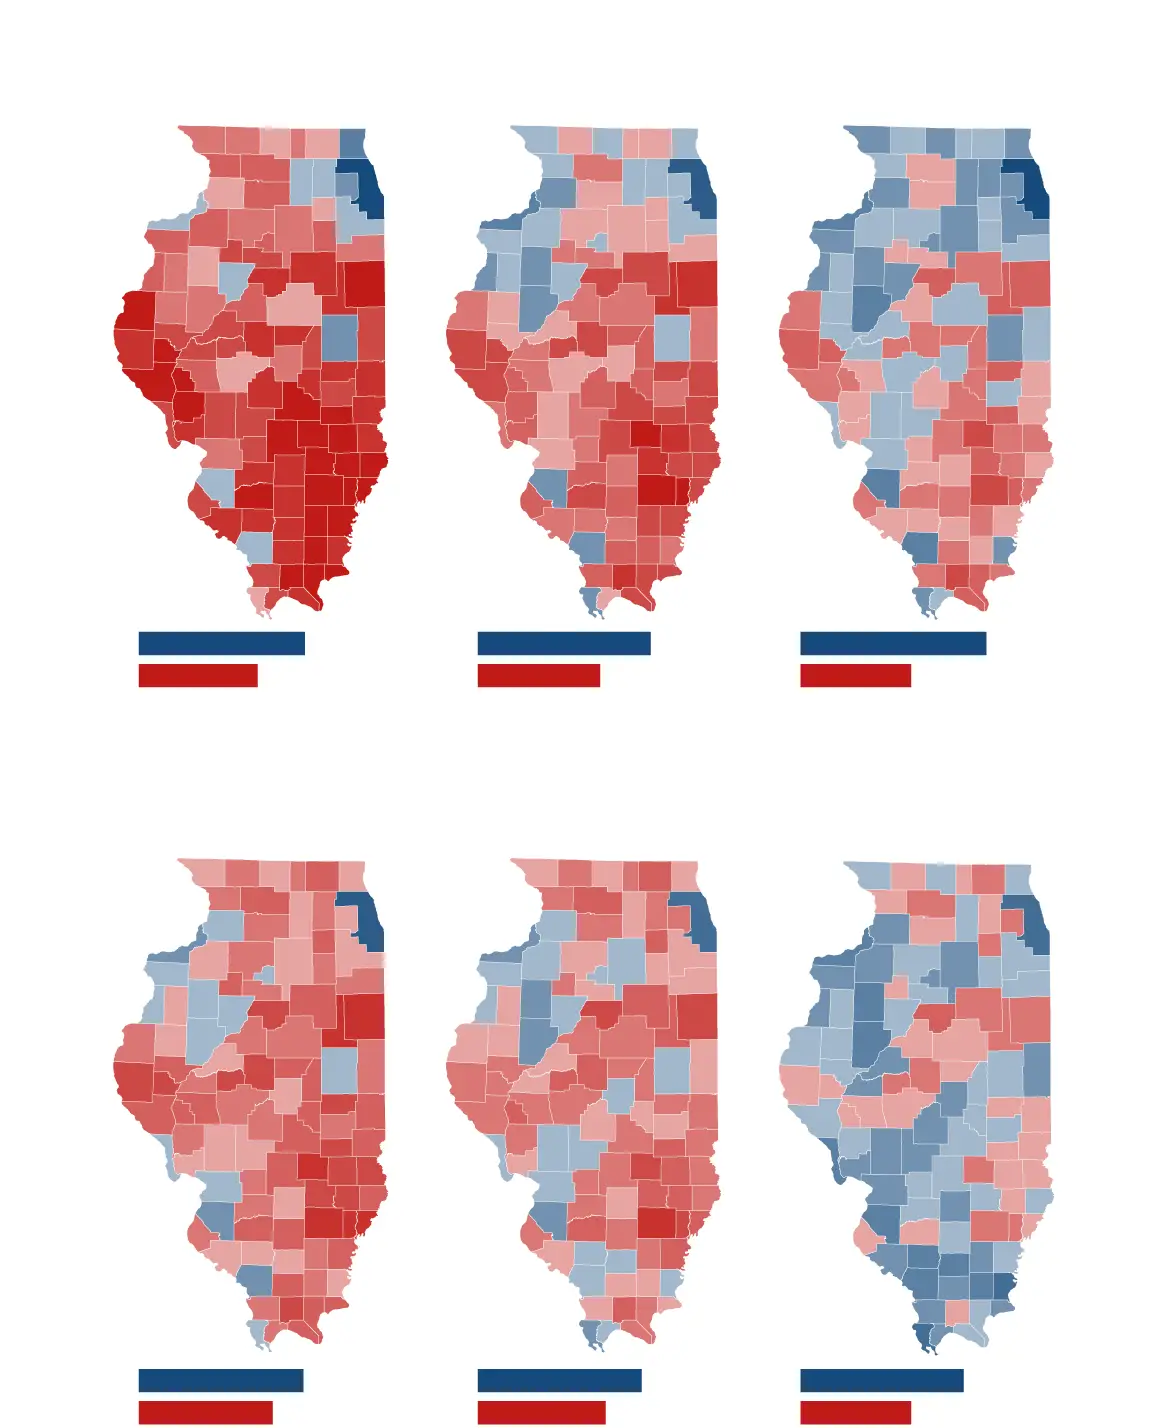 Illinois presidential vote results, by county